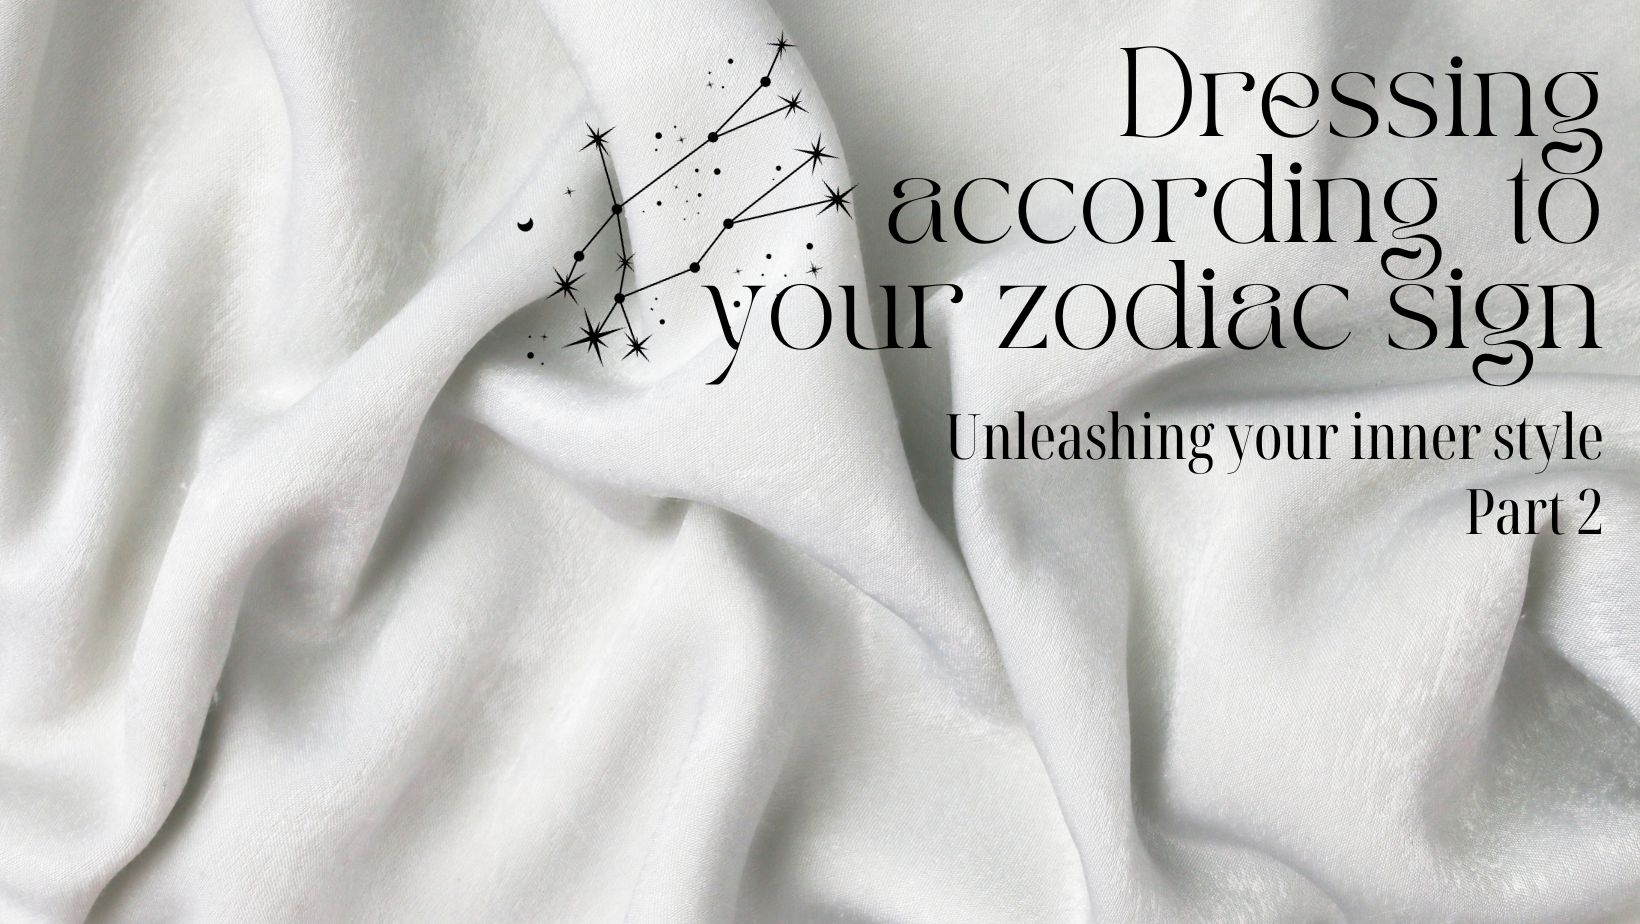 Dressing according to your zodiac sign-Part 2